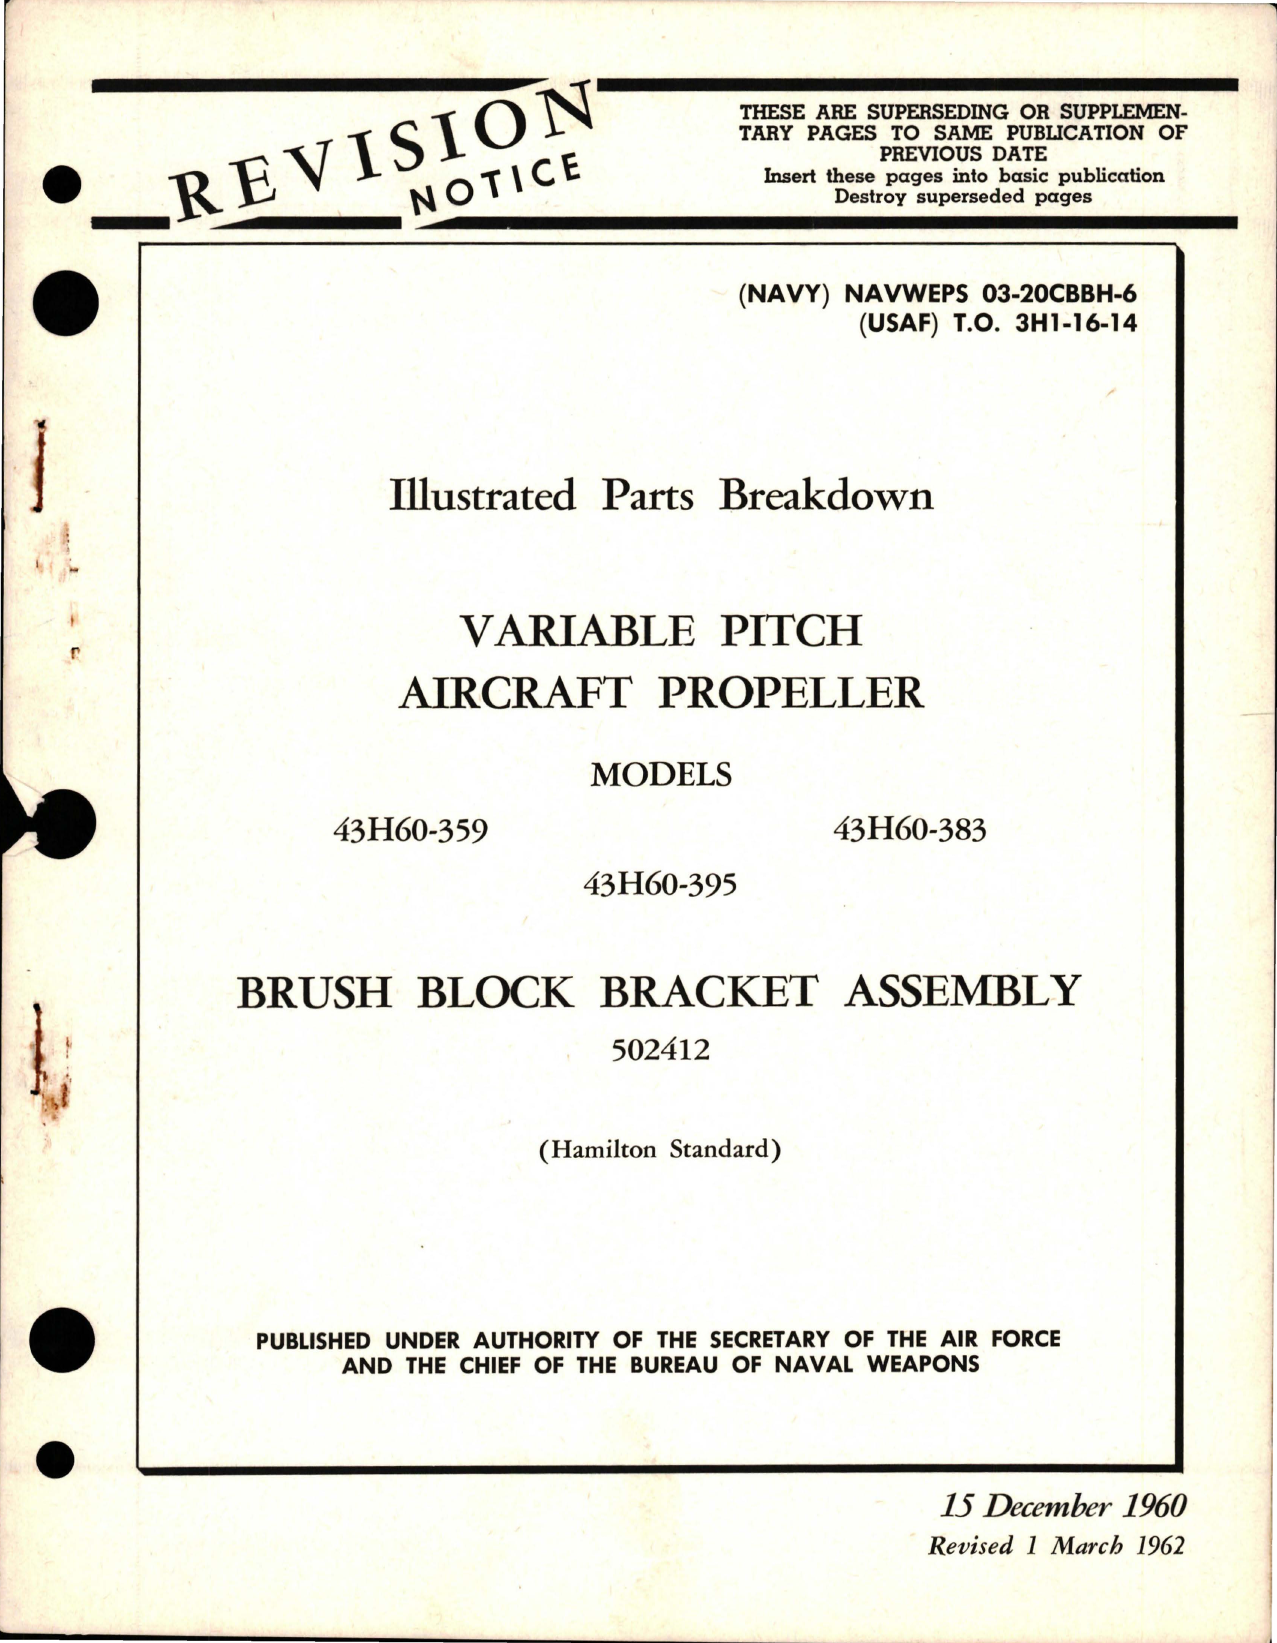 Sample page 1 from AirCorps Library document: Illustrated Parts Breakdown for Variable Pitch Propeller and Brush Block Bracket Assembly